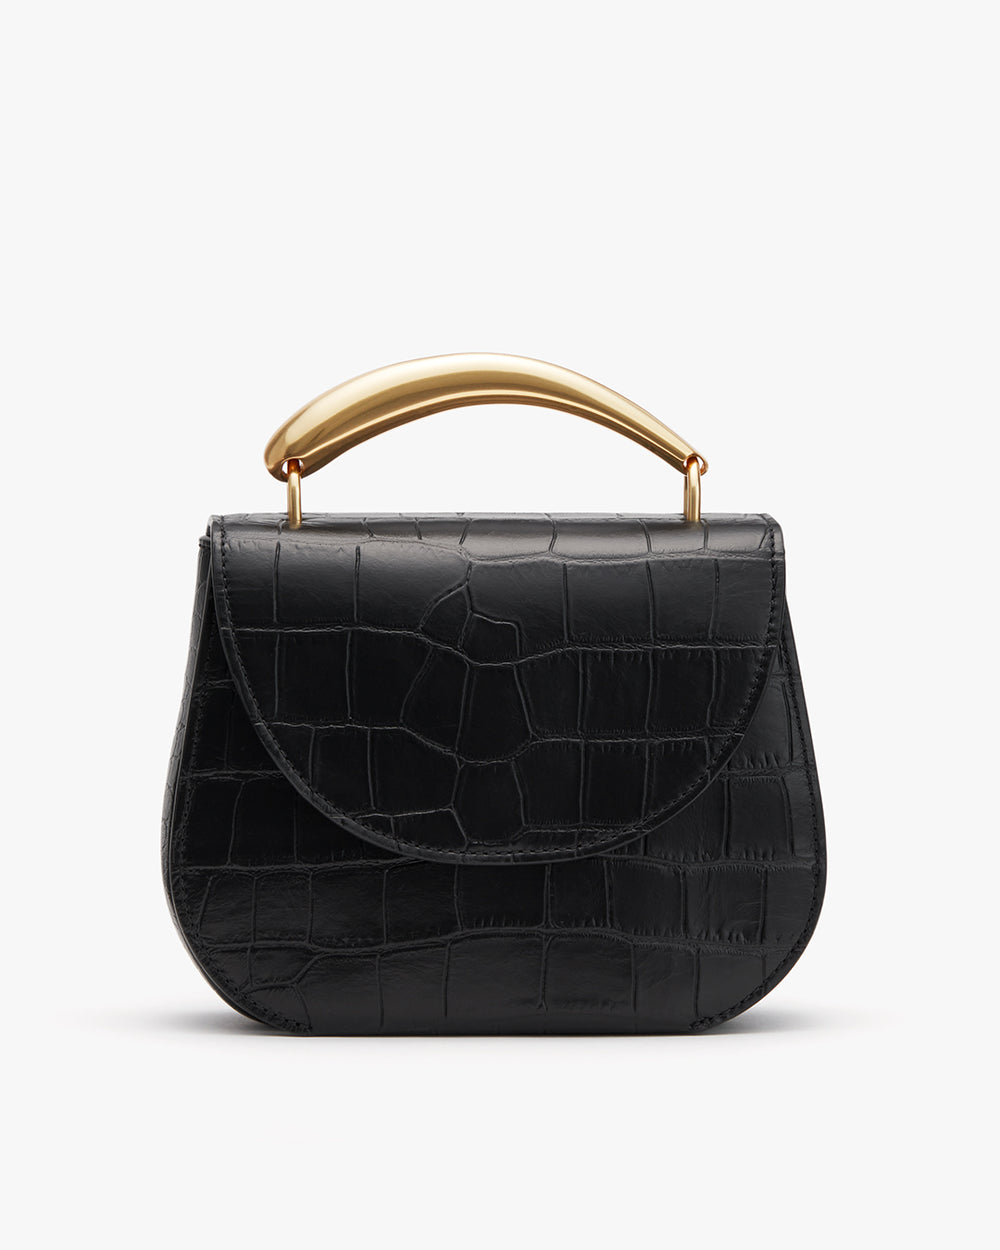 Handbag with a top handle and textured surface.